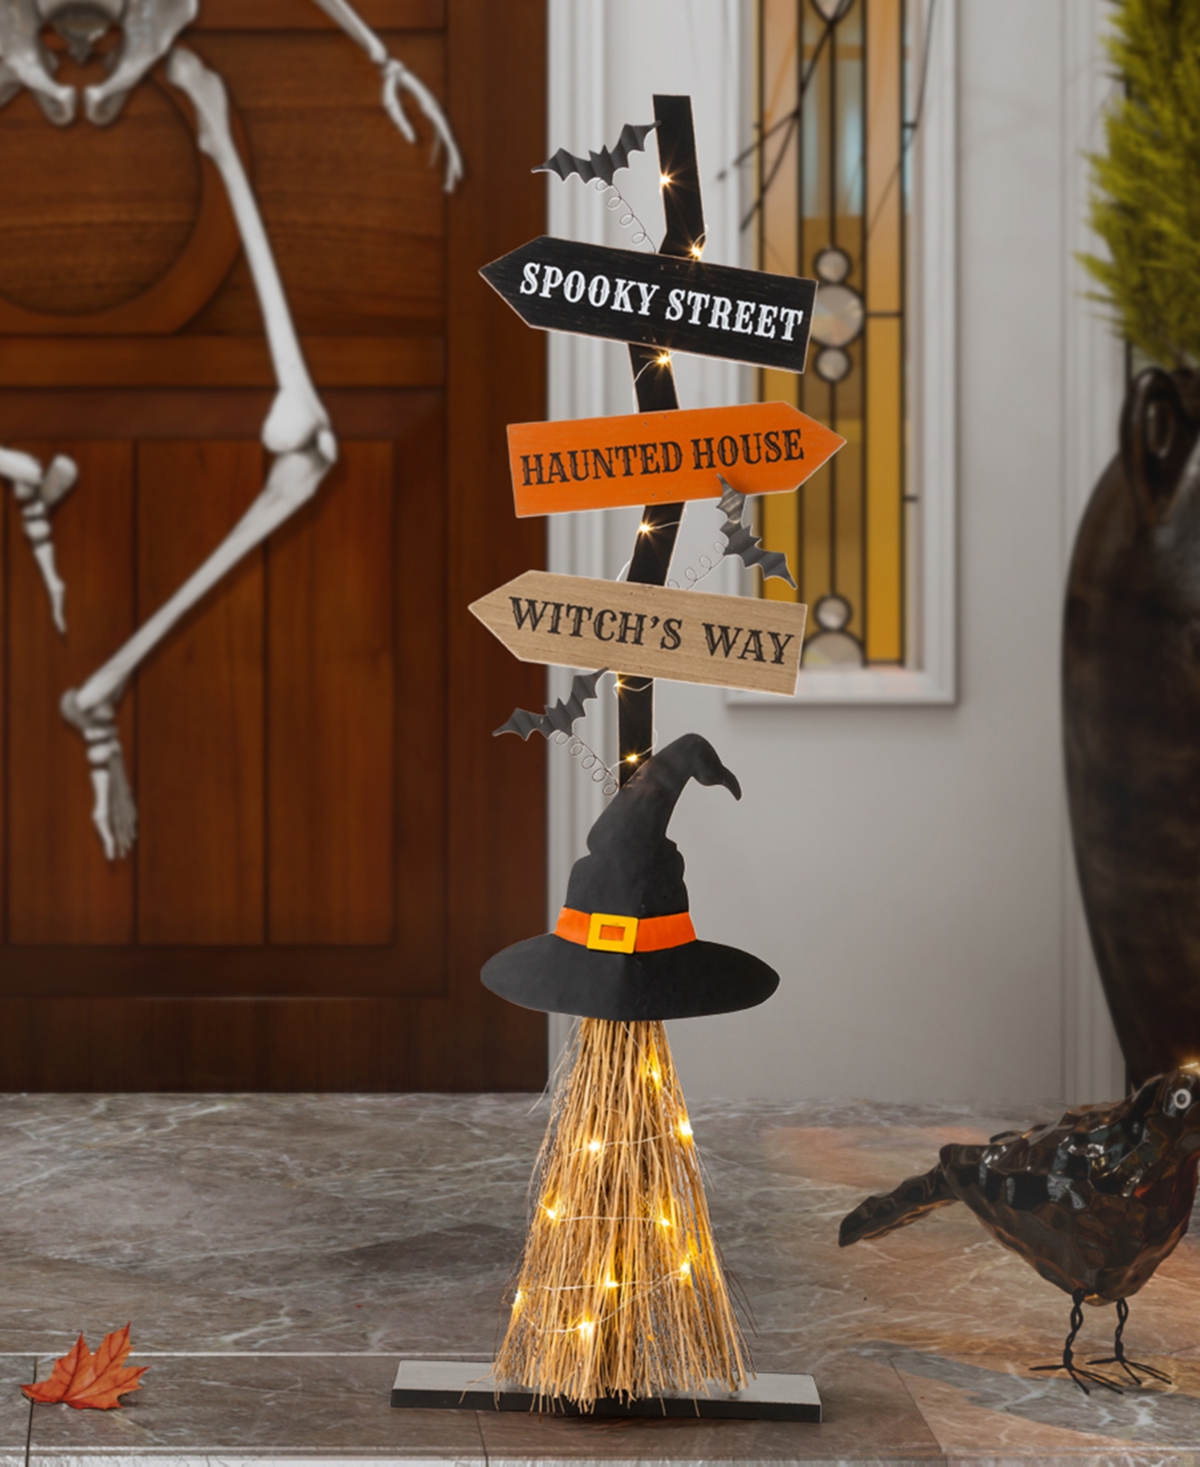 42" H Lighted Wooden Witch's Broom Porch Decor - Multi